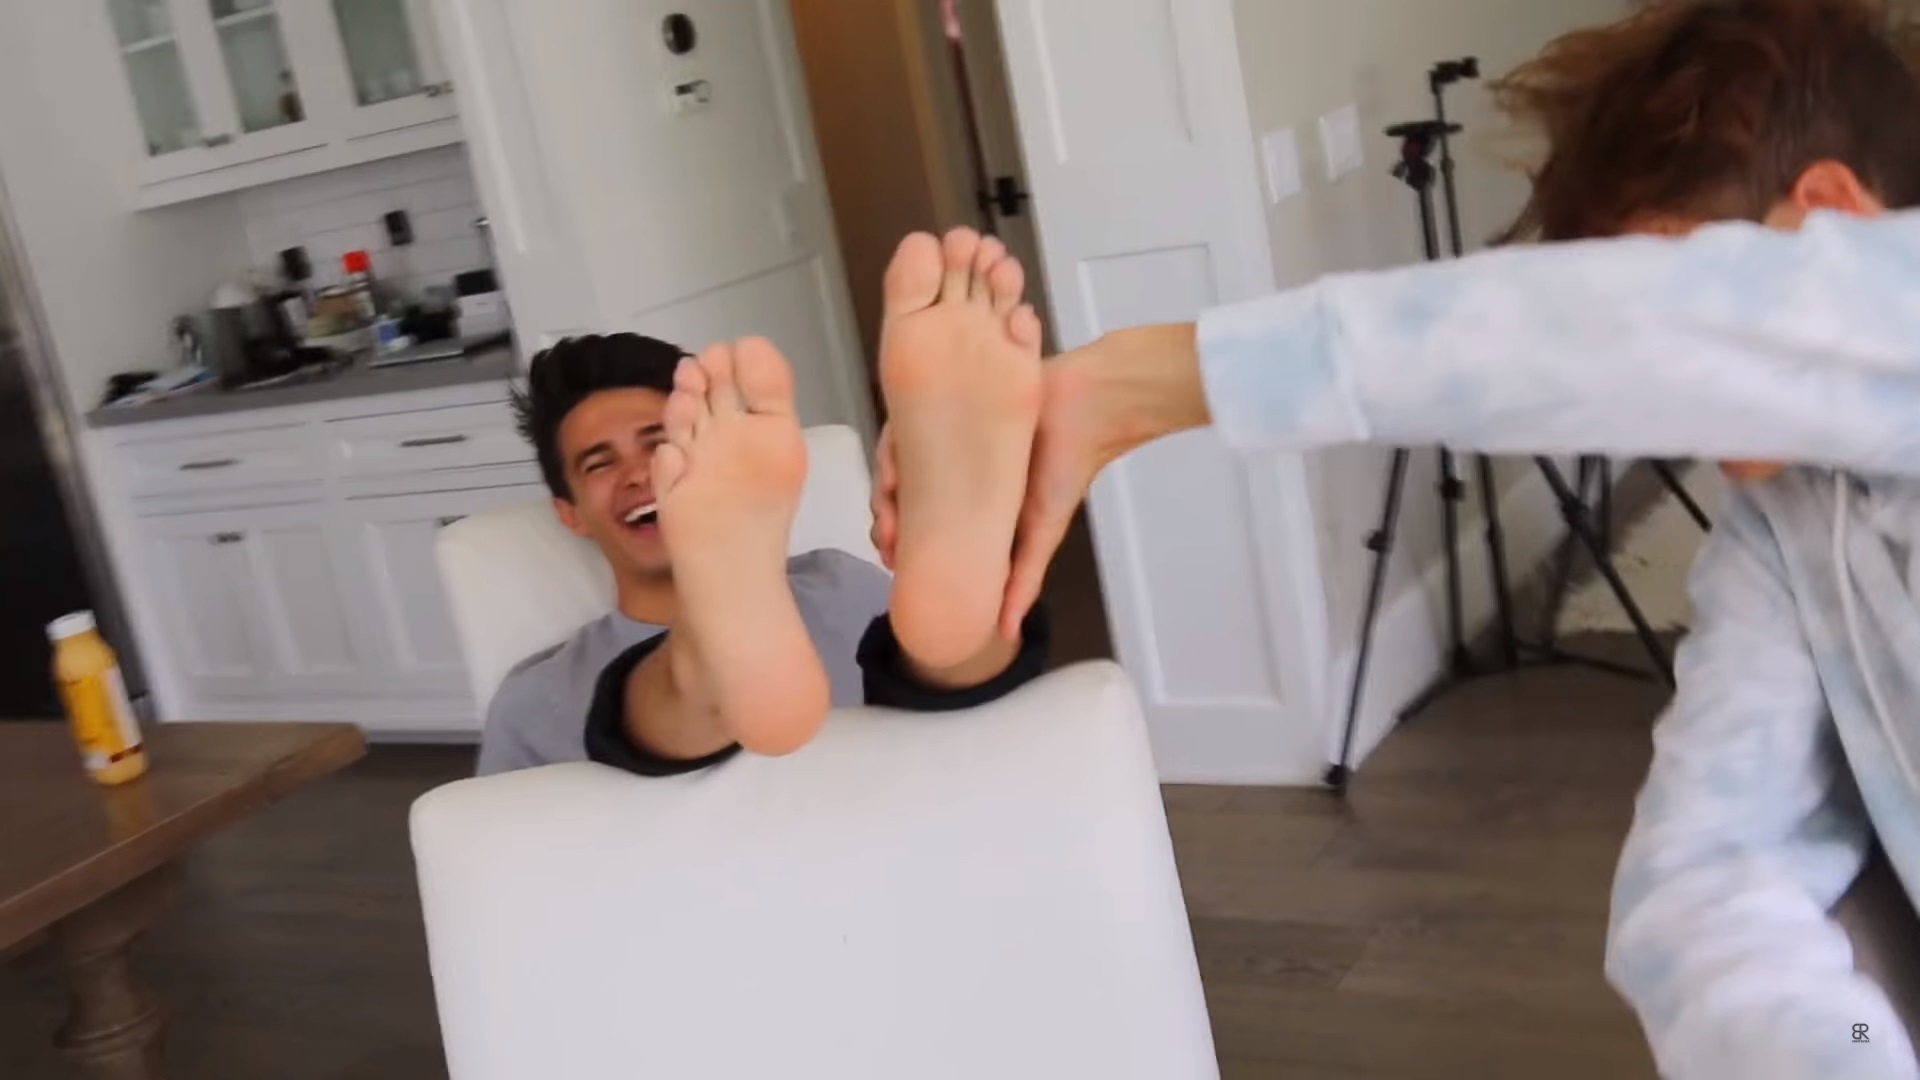 Male feet conversesock removal compilations